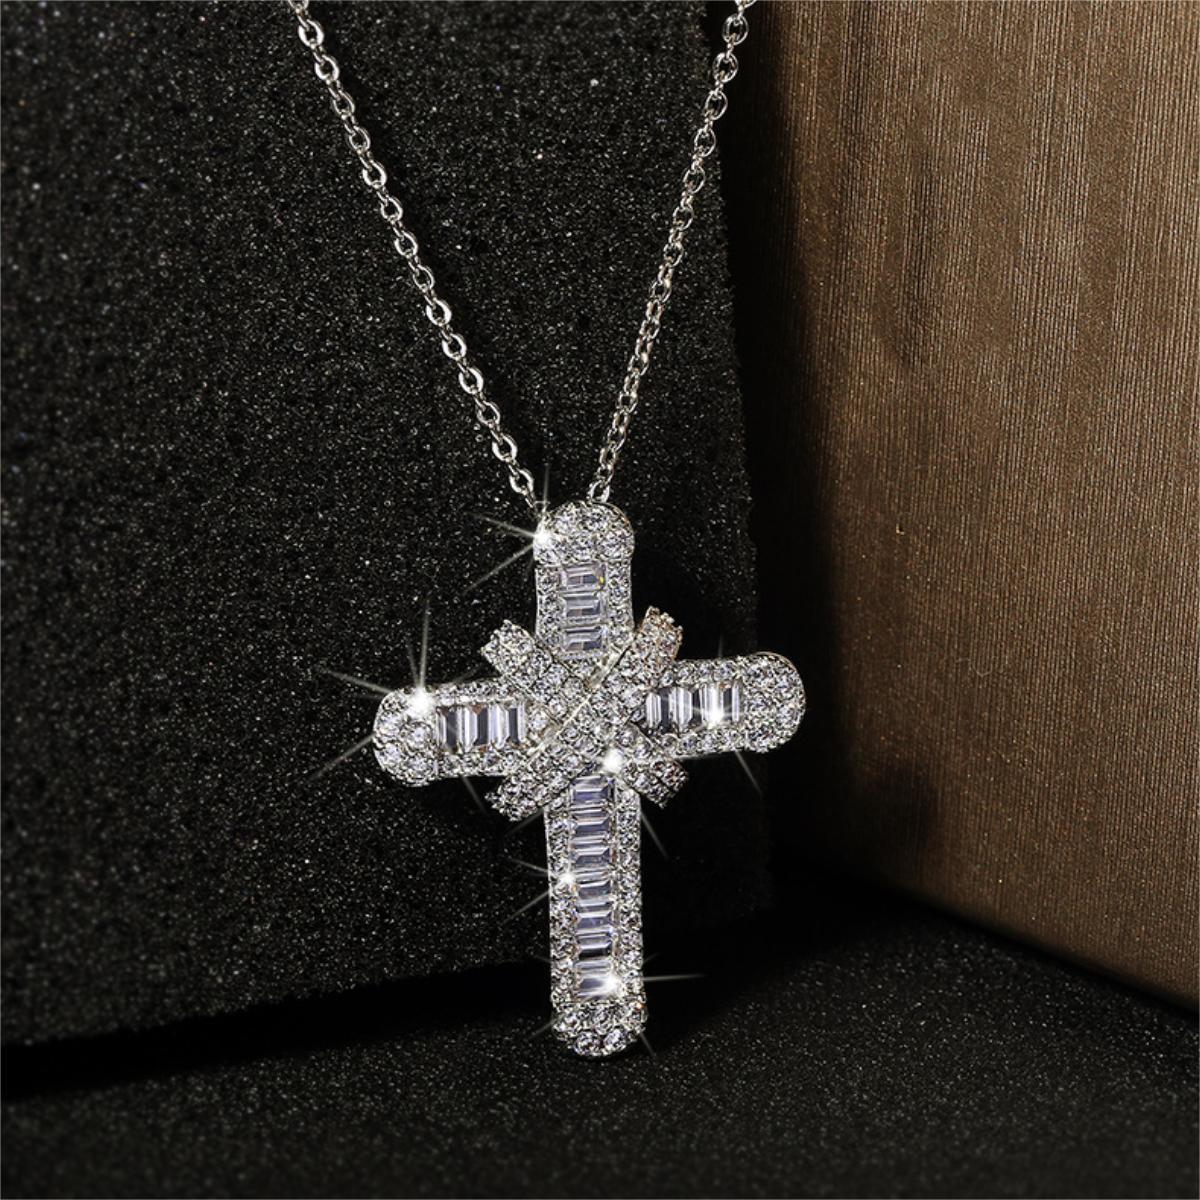 Womens Crystal Cross Necklace Sliver HIP-HOP Pendant for Men Religious Christian Jewelry Gifts for Anniversaries Holidays Christmas Birthdays